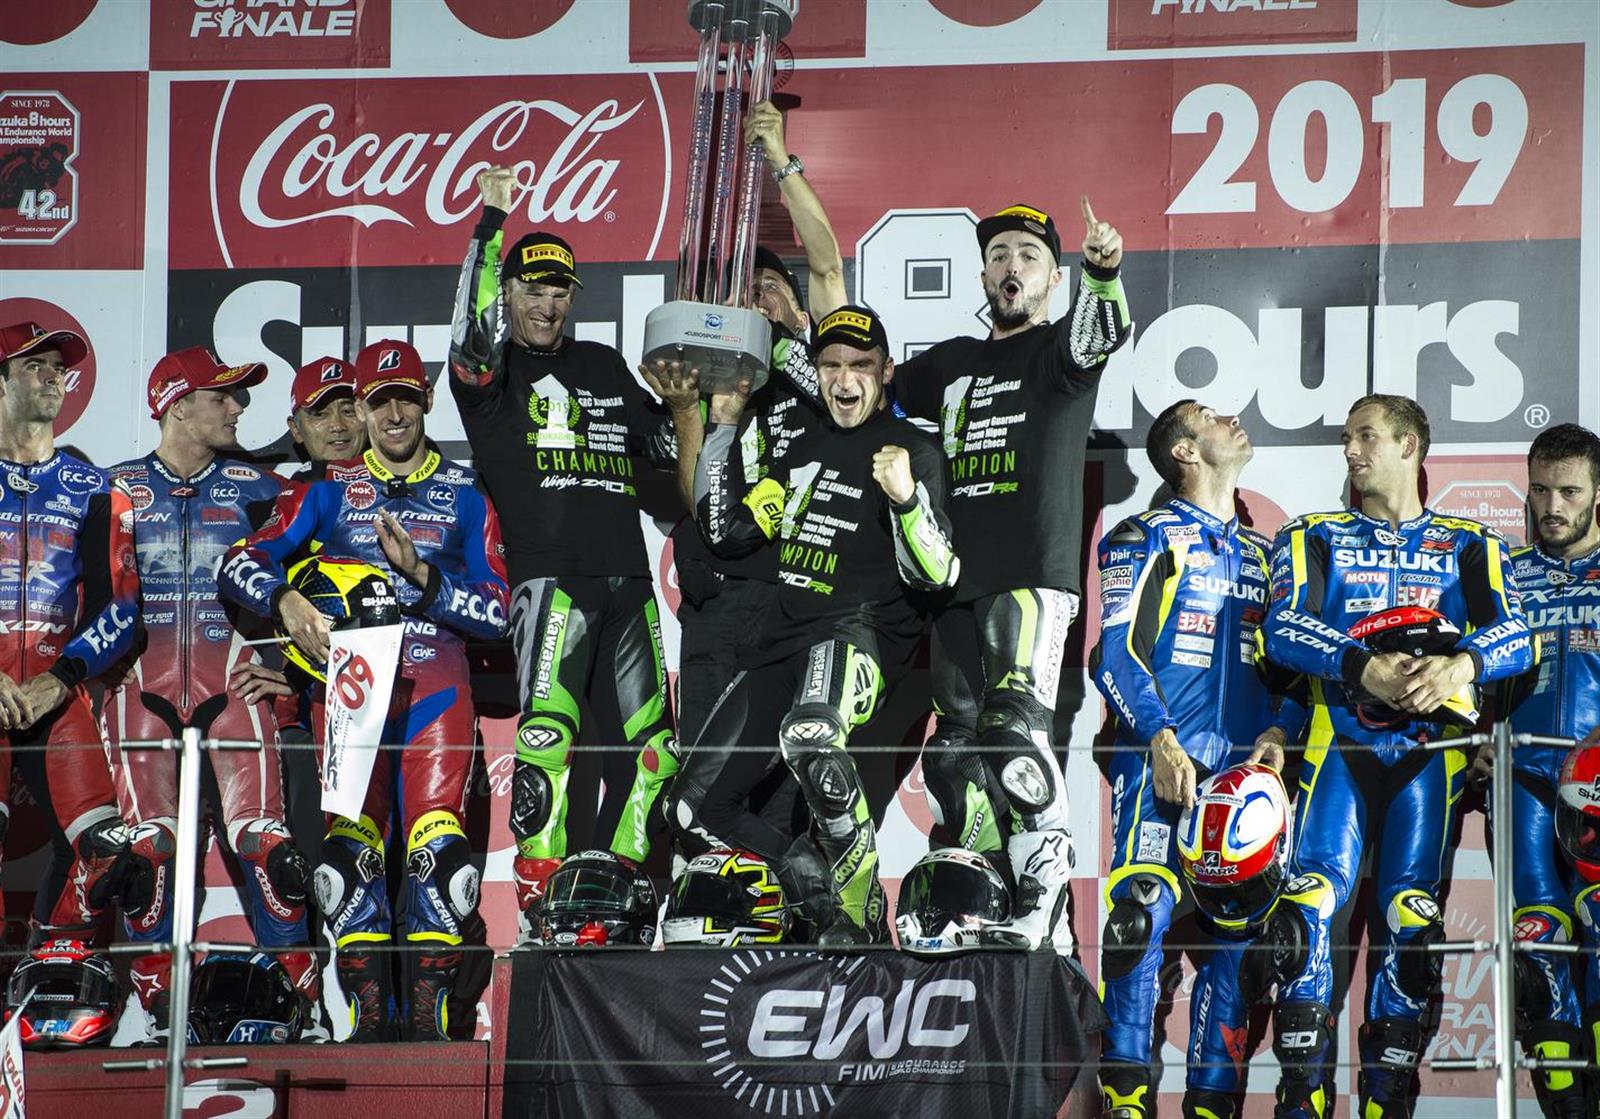 Victorious Suzuka 8 Hours For KRT As SRC Kawasaki France Wins The Championship!